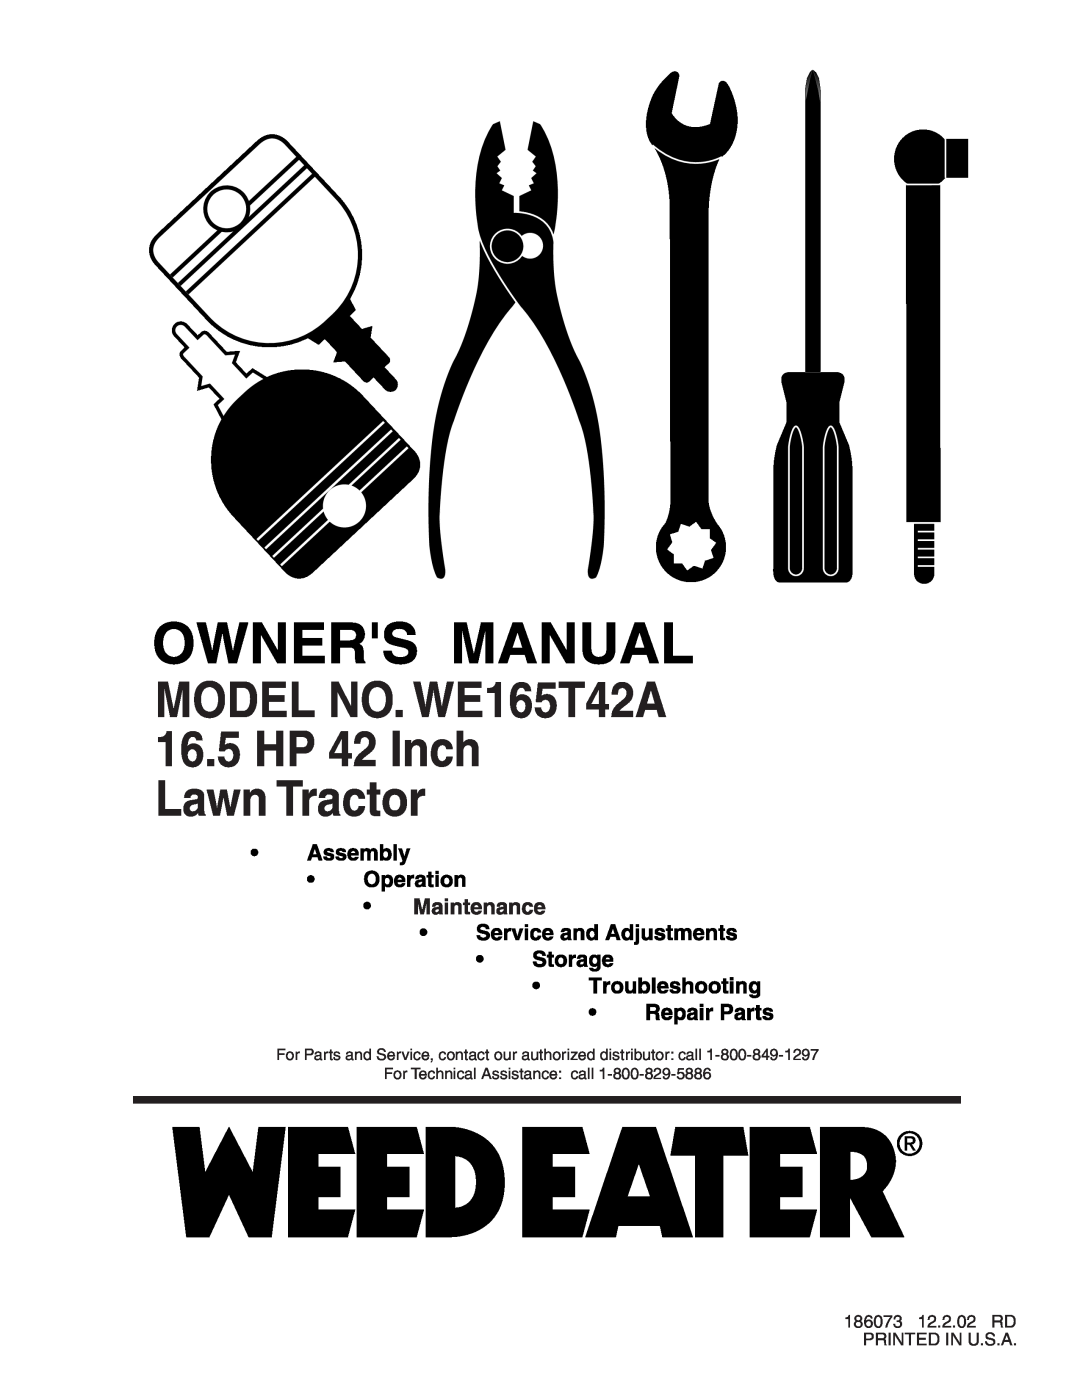 Weed Eater manual MODEL NO. WE165T42A 16.5 HP 42 Inch Lawn Tractor, 186073 12.2.02 RD PRINTED IN U.S.A 